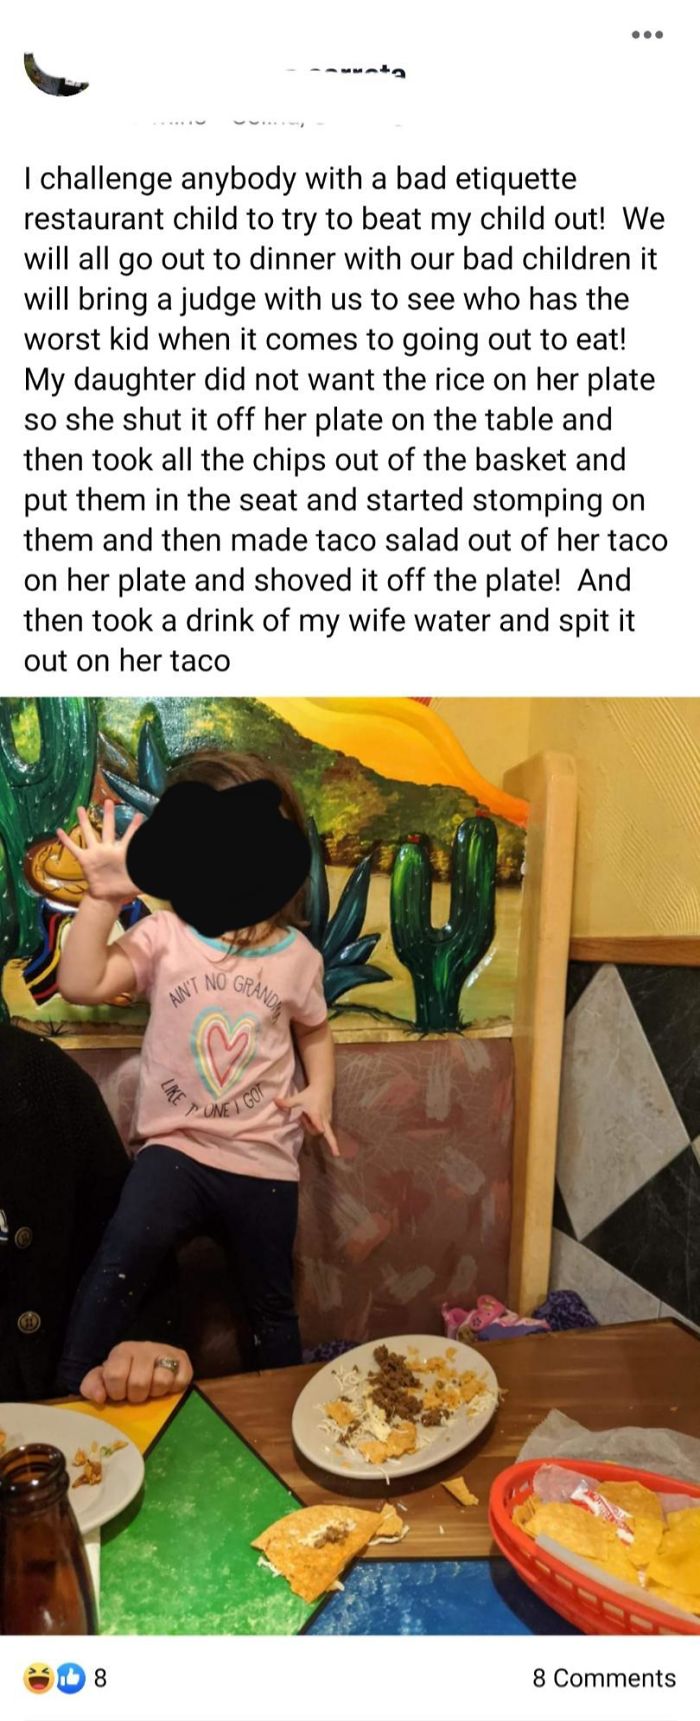 Parents Bragging On Facebook About Their Kid's Awful Behavior While Out To Dinner At A Restaurant